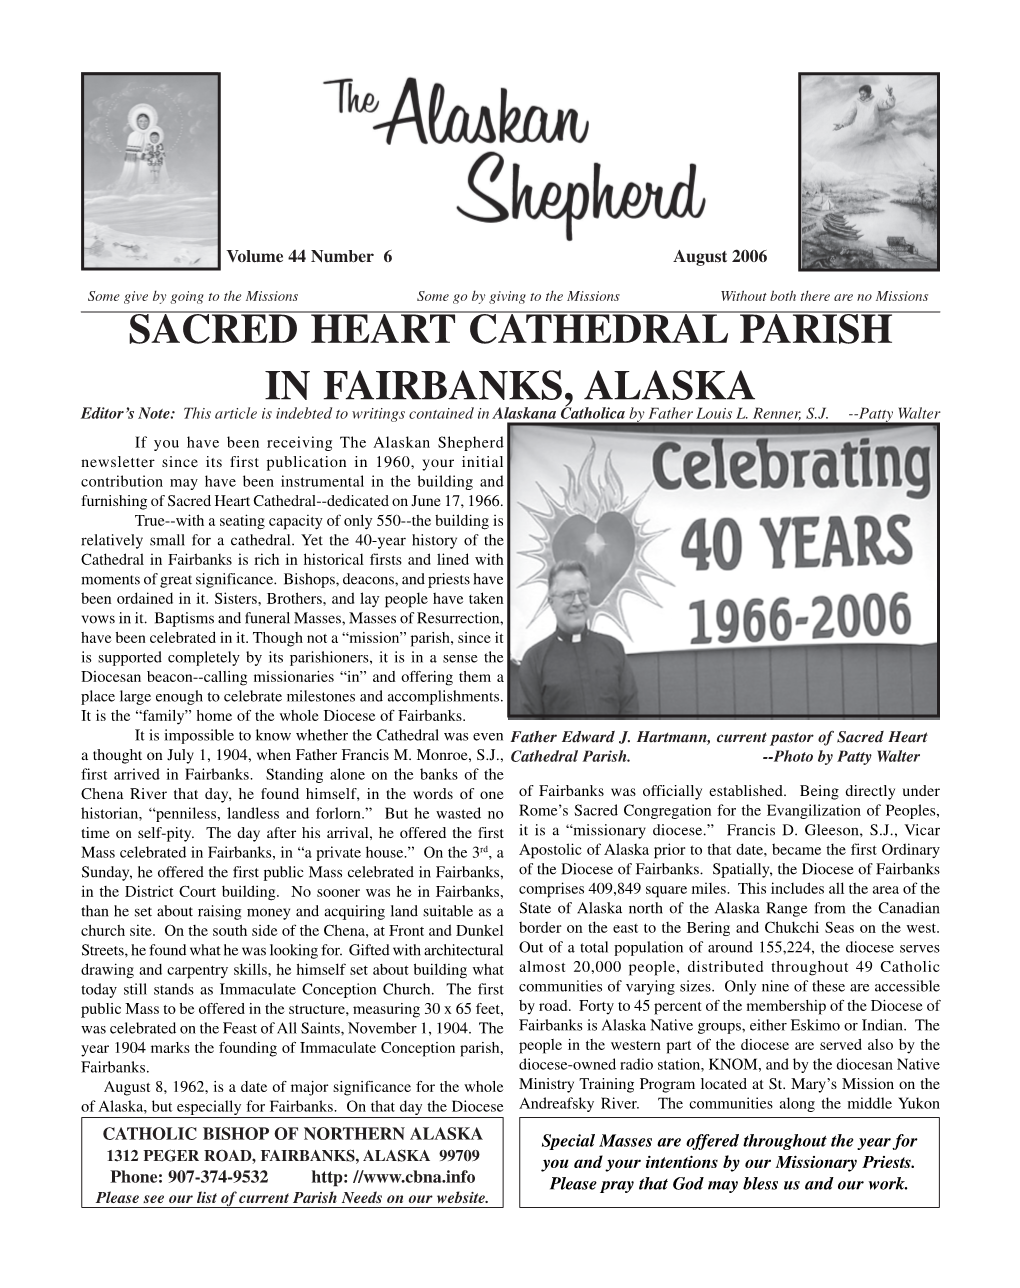 SACRED HEART CATHEDRAL PARISH in FAIRBANKS, ALASKA Editor’S Note: This Article Is Indebted to Writings Contained in Alaskana Catholica by Father Louis L